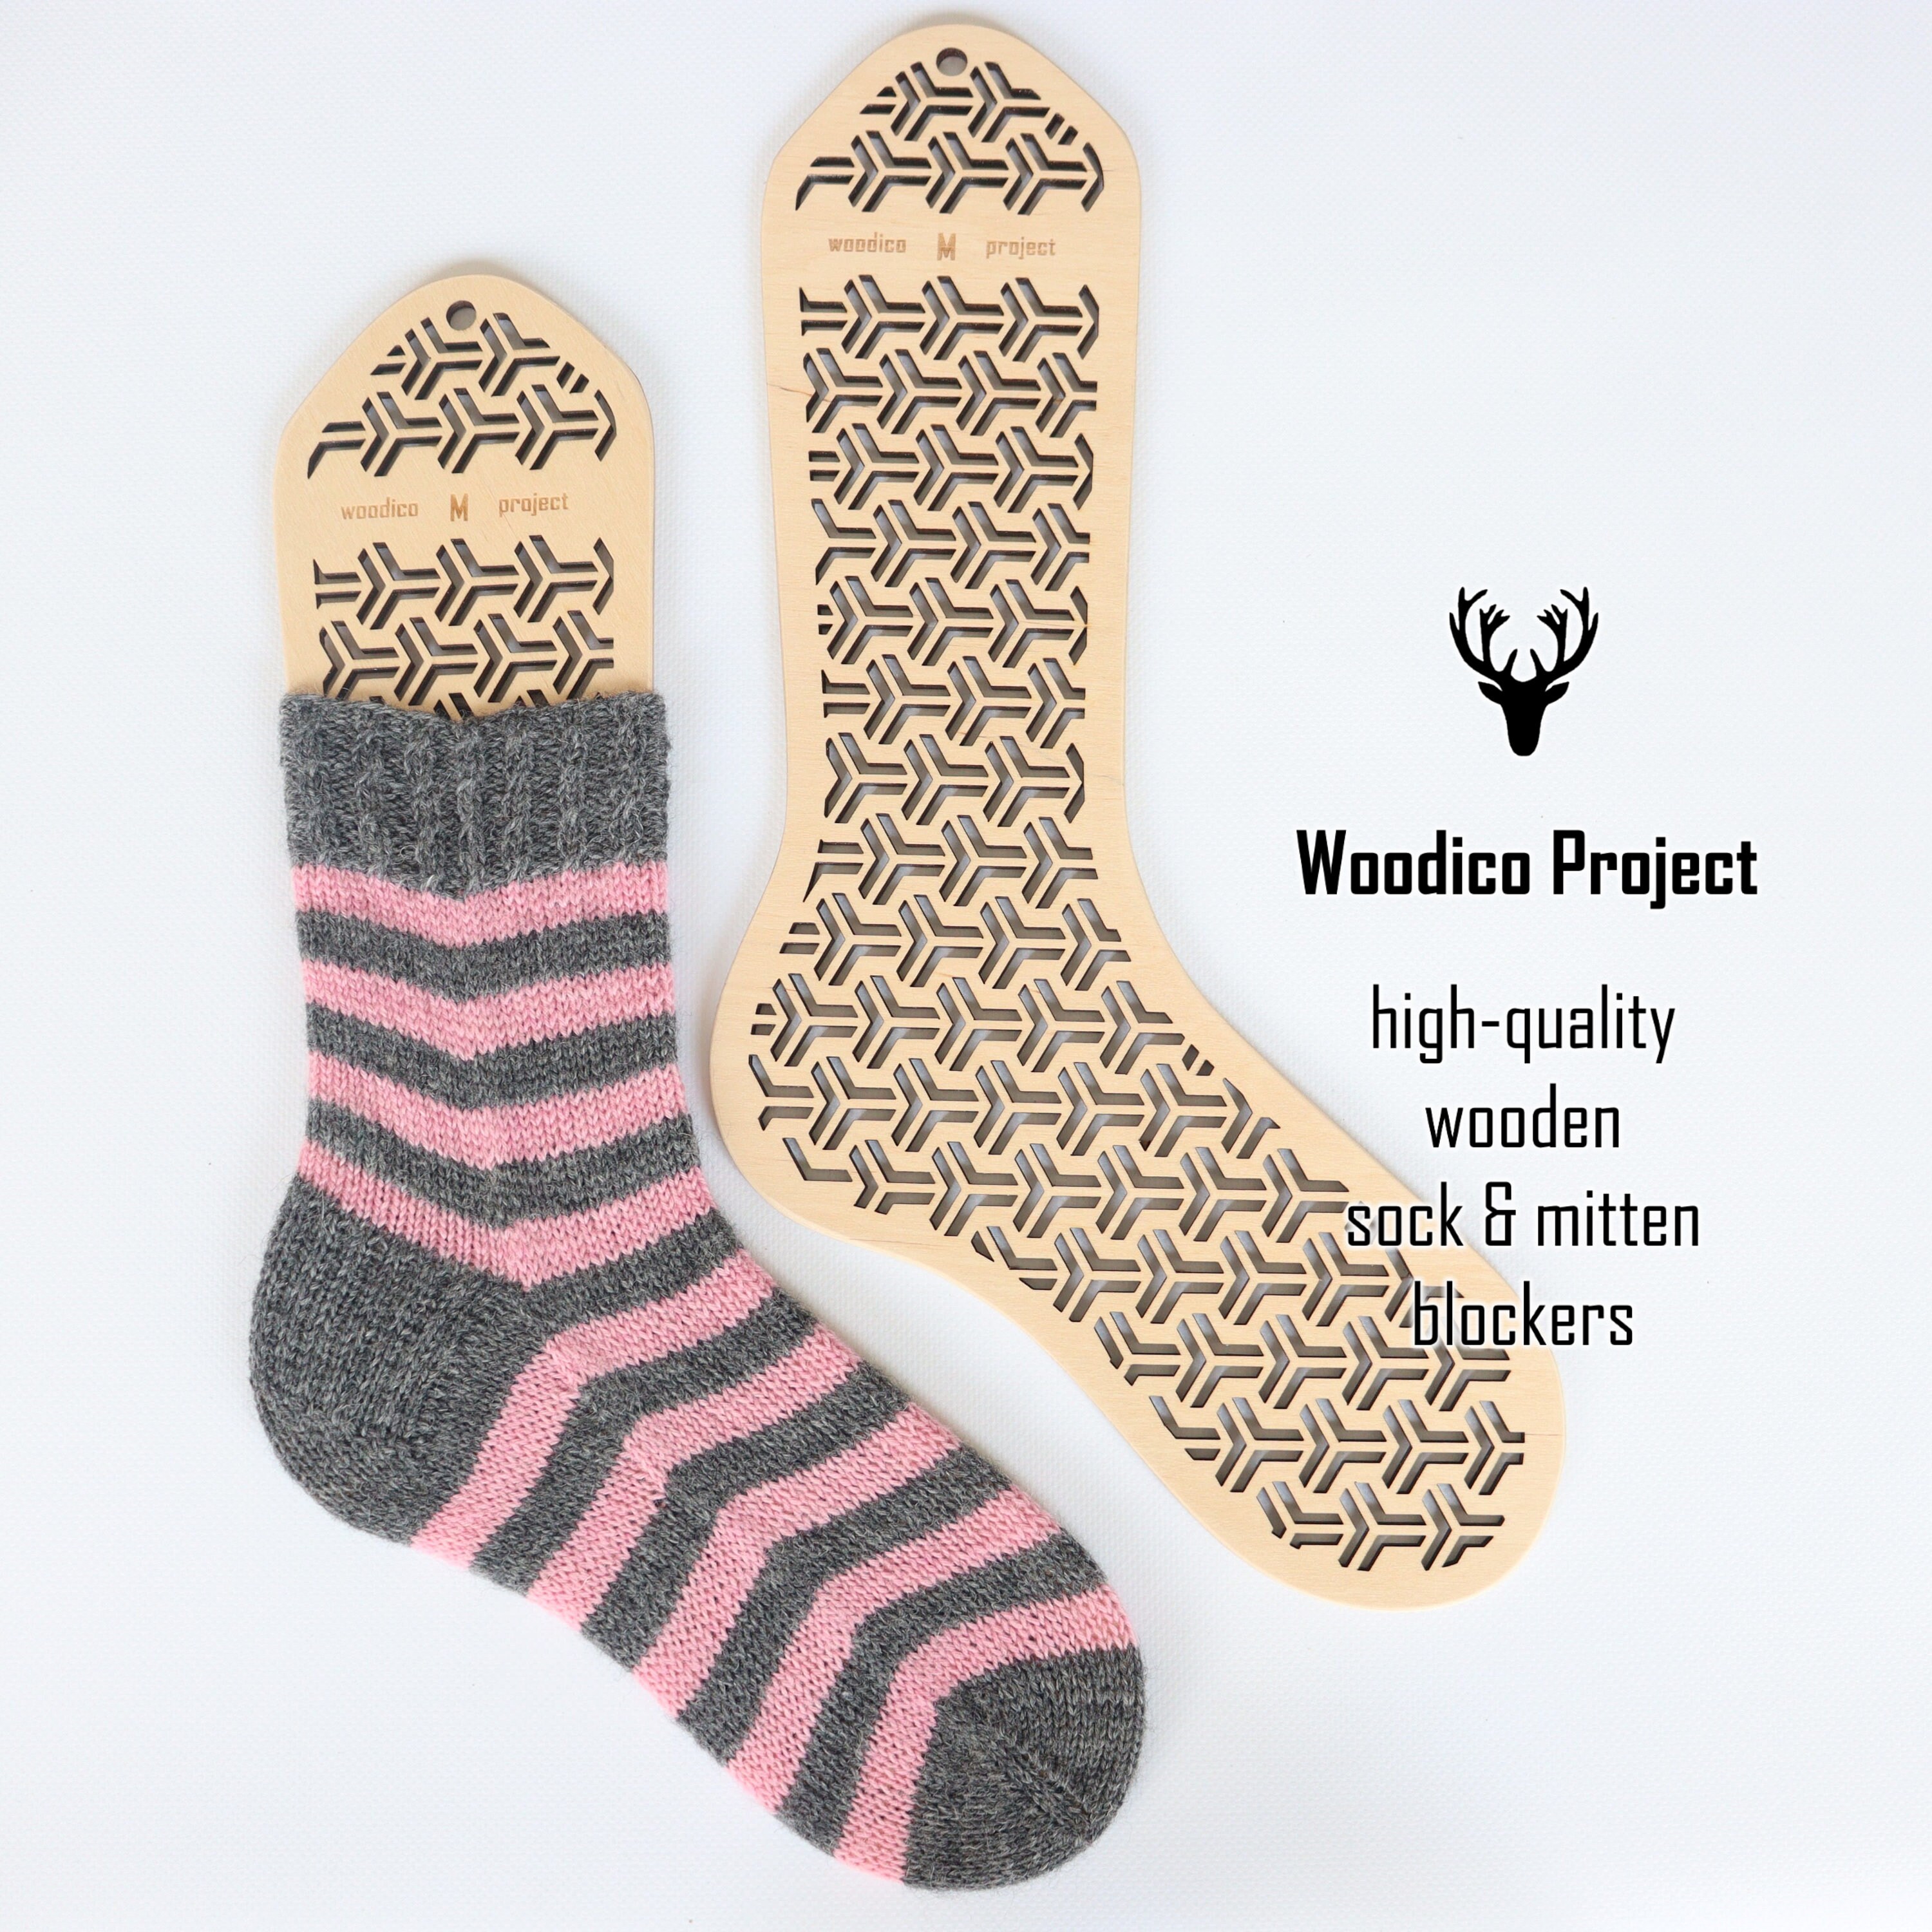 Wooden Sock Blockers (Pair) Hearts - Knitting Accessories, Gift for Knitter, Wooden Sock Form, Knitted Socks